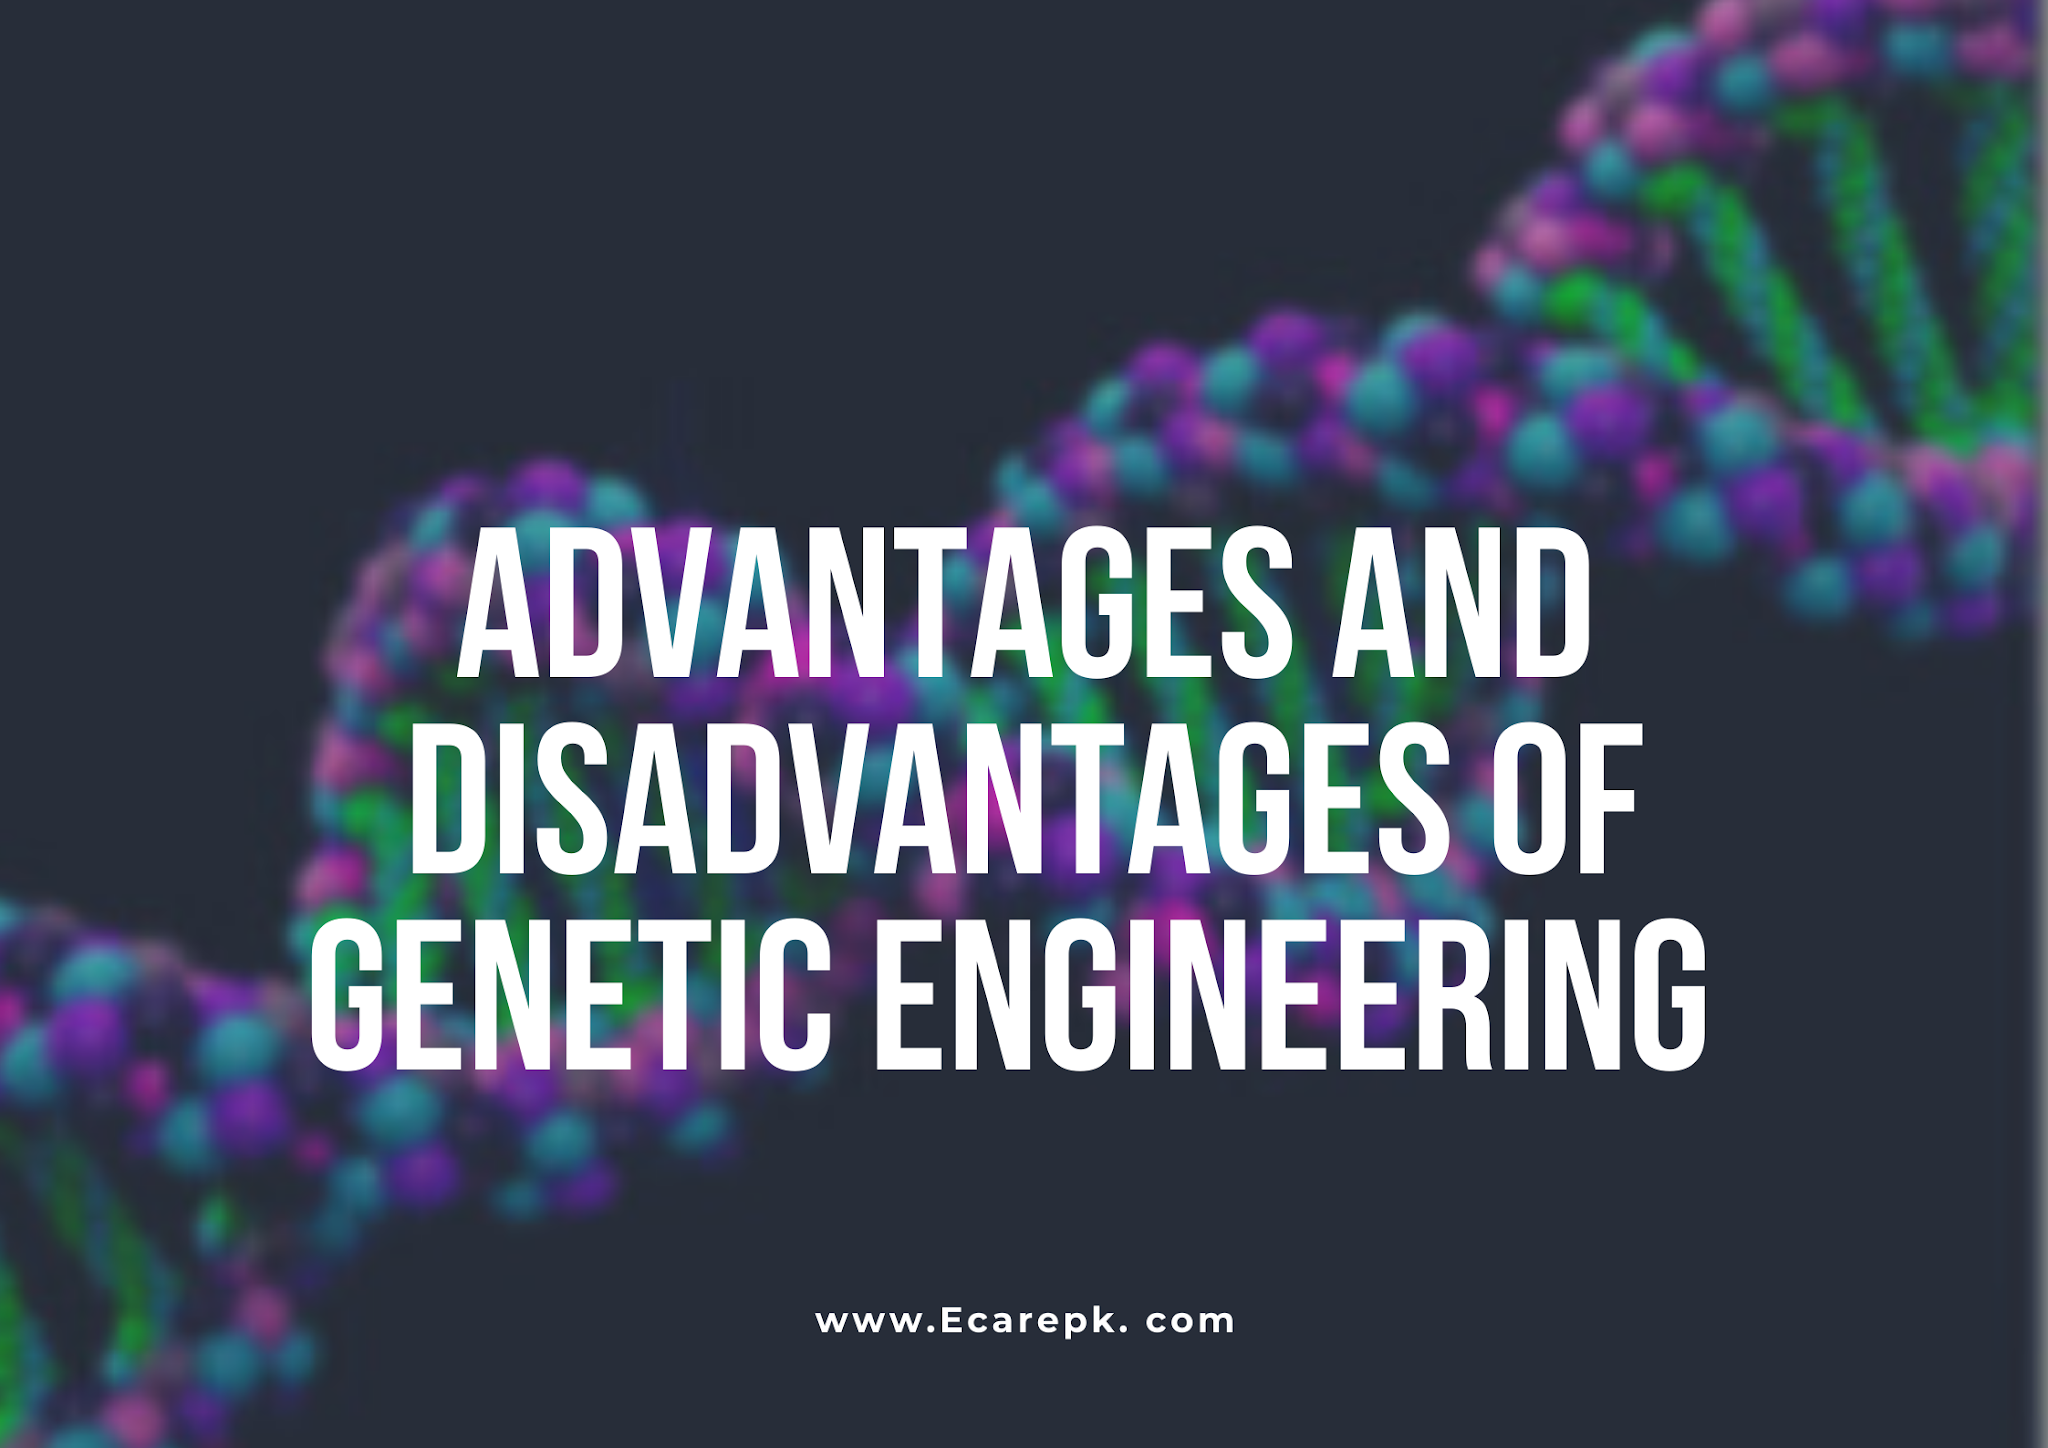 Advantages and Disadvantages of Biotechnology and Engineering